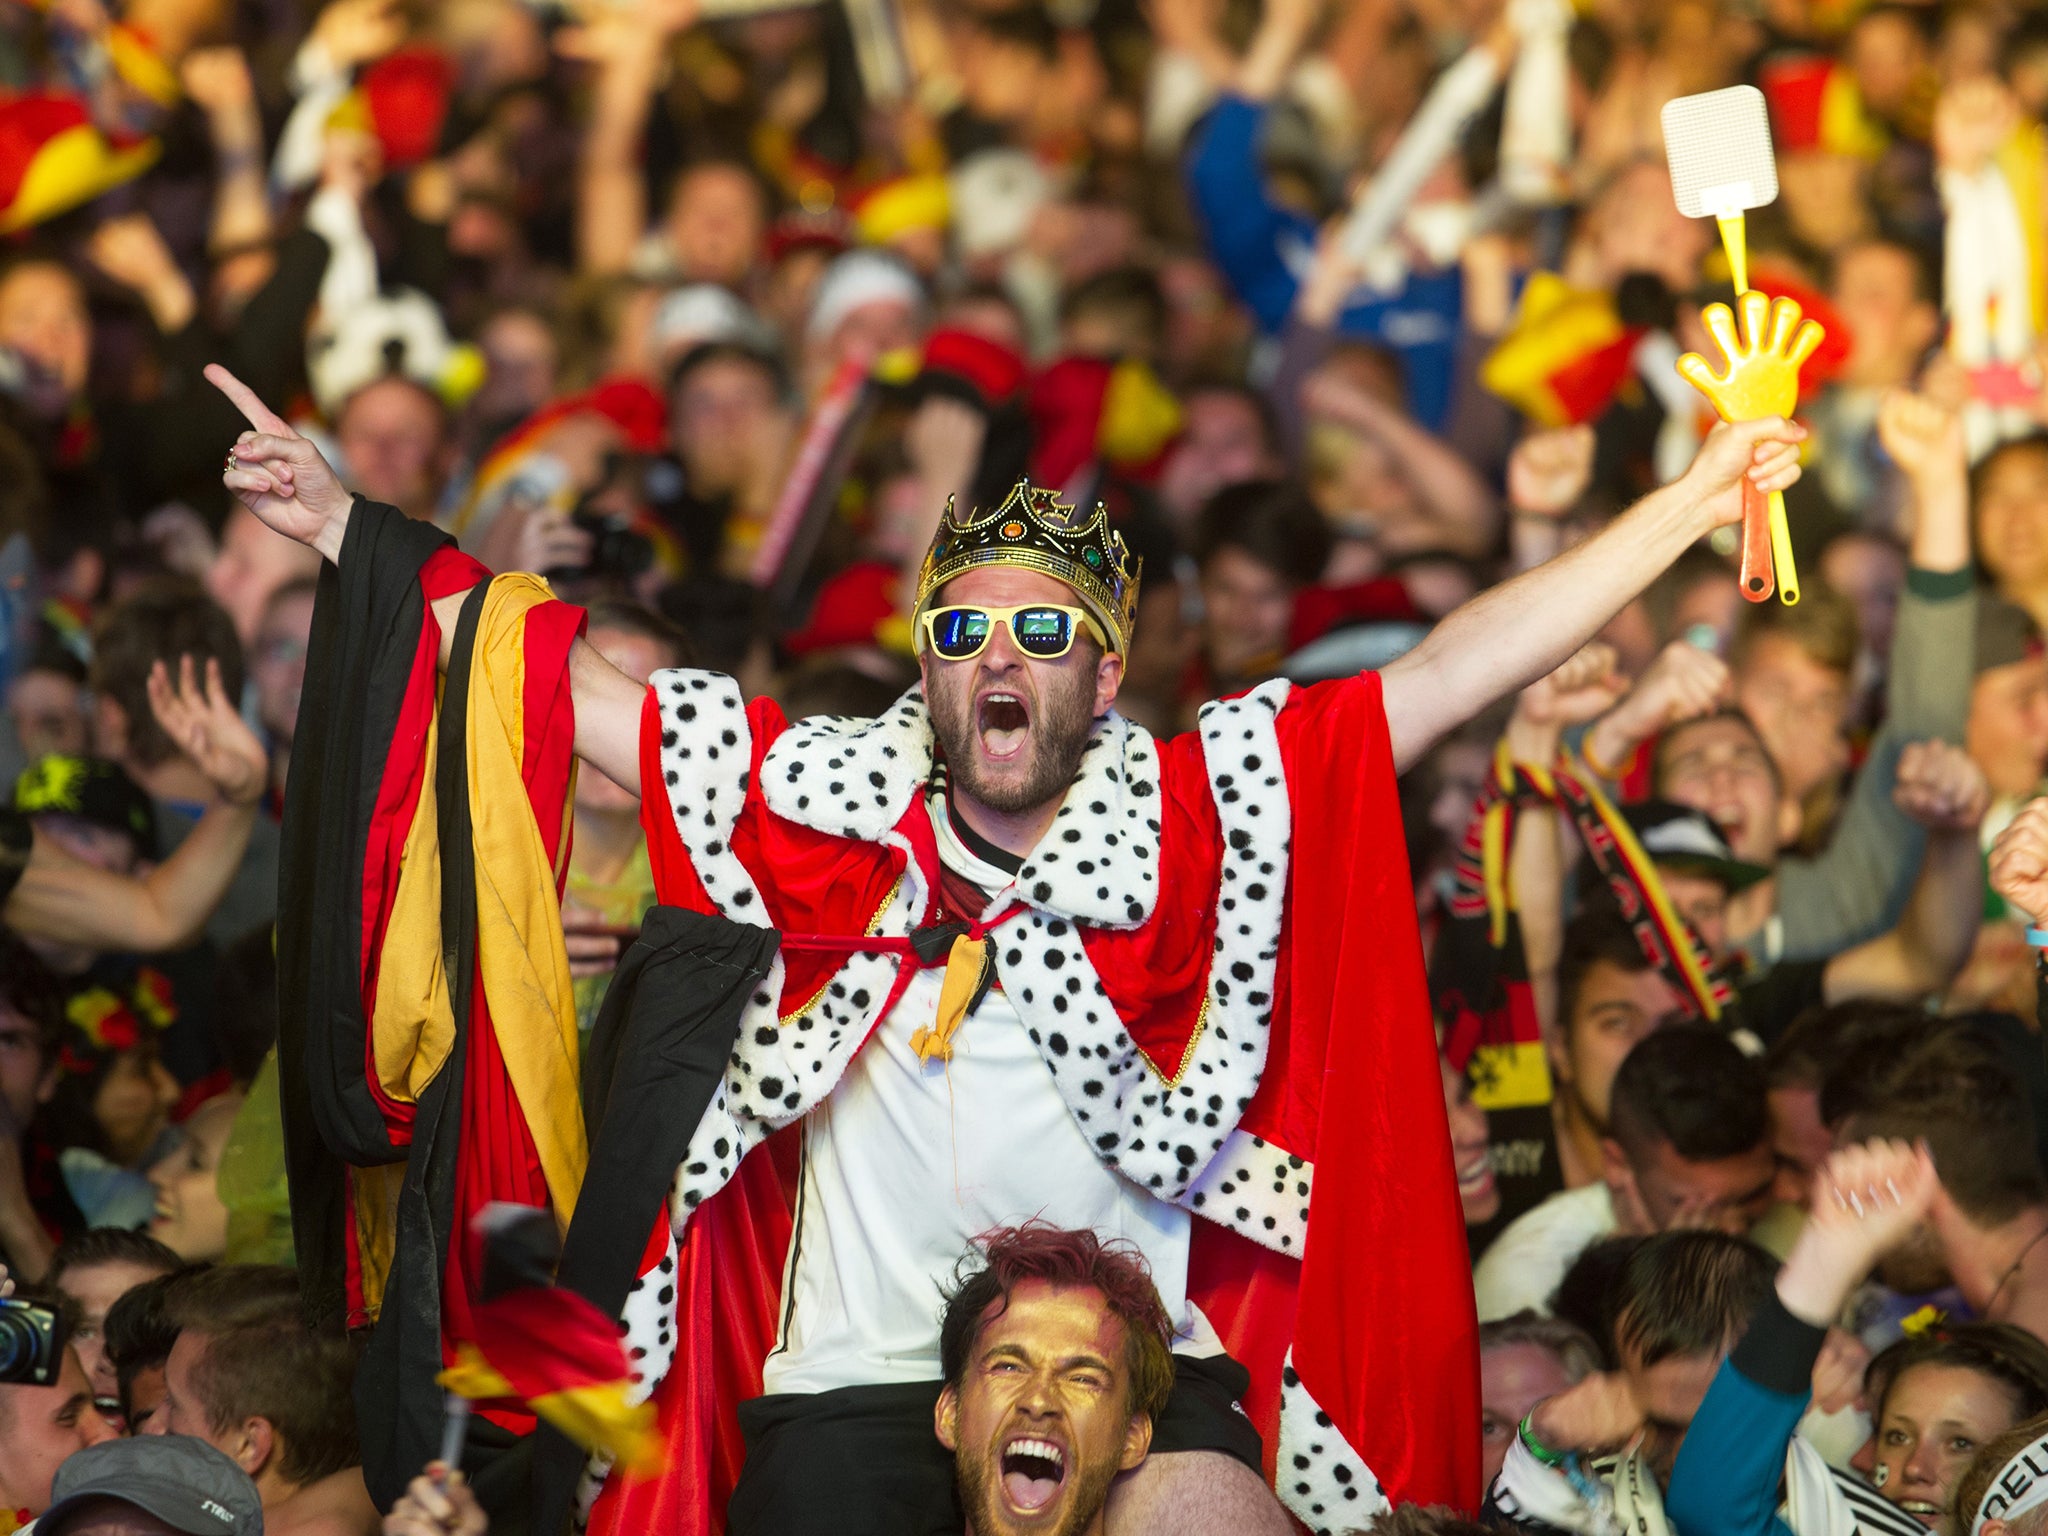 German soccer fans react after the deciding goal for Germany in the final of the Brazil World Cup 2014